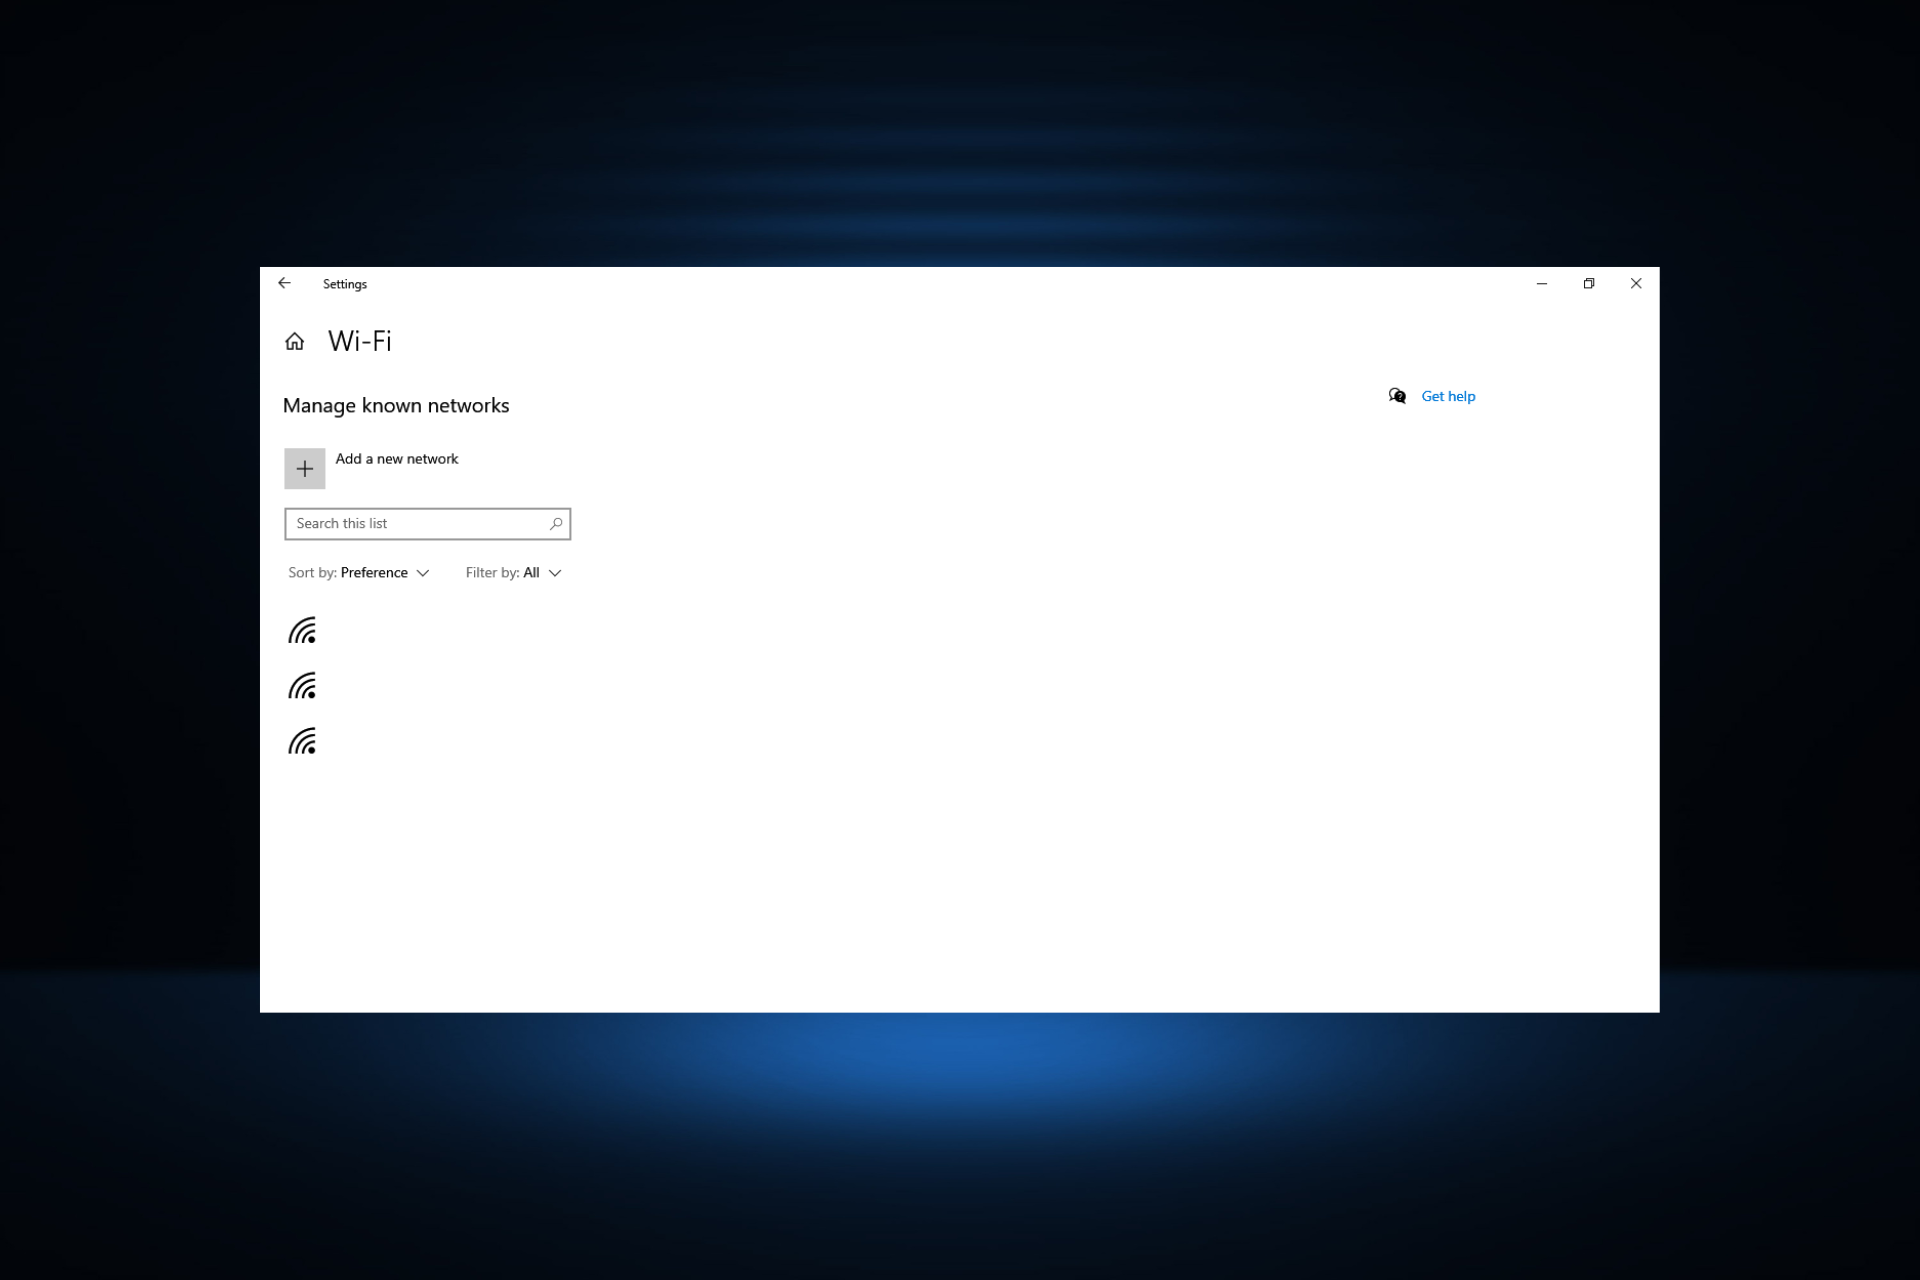 Learn how to find the wi-fi password in Windows 10